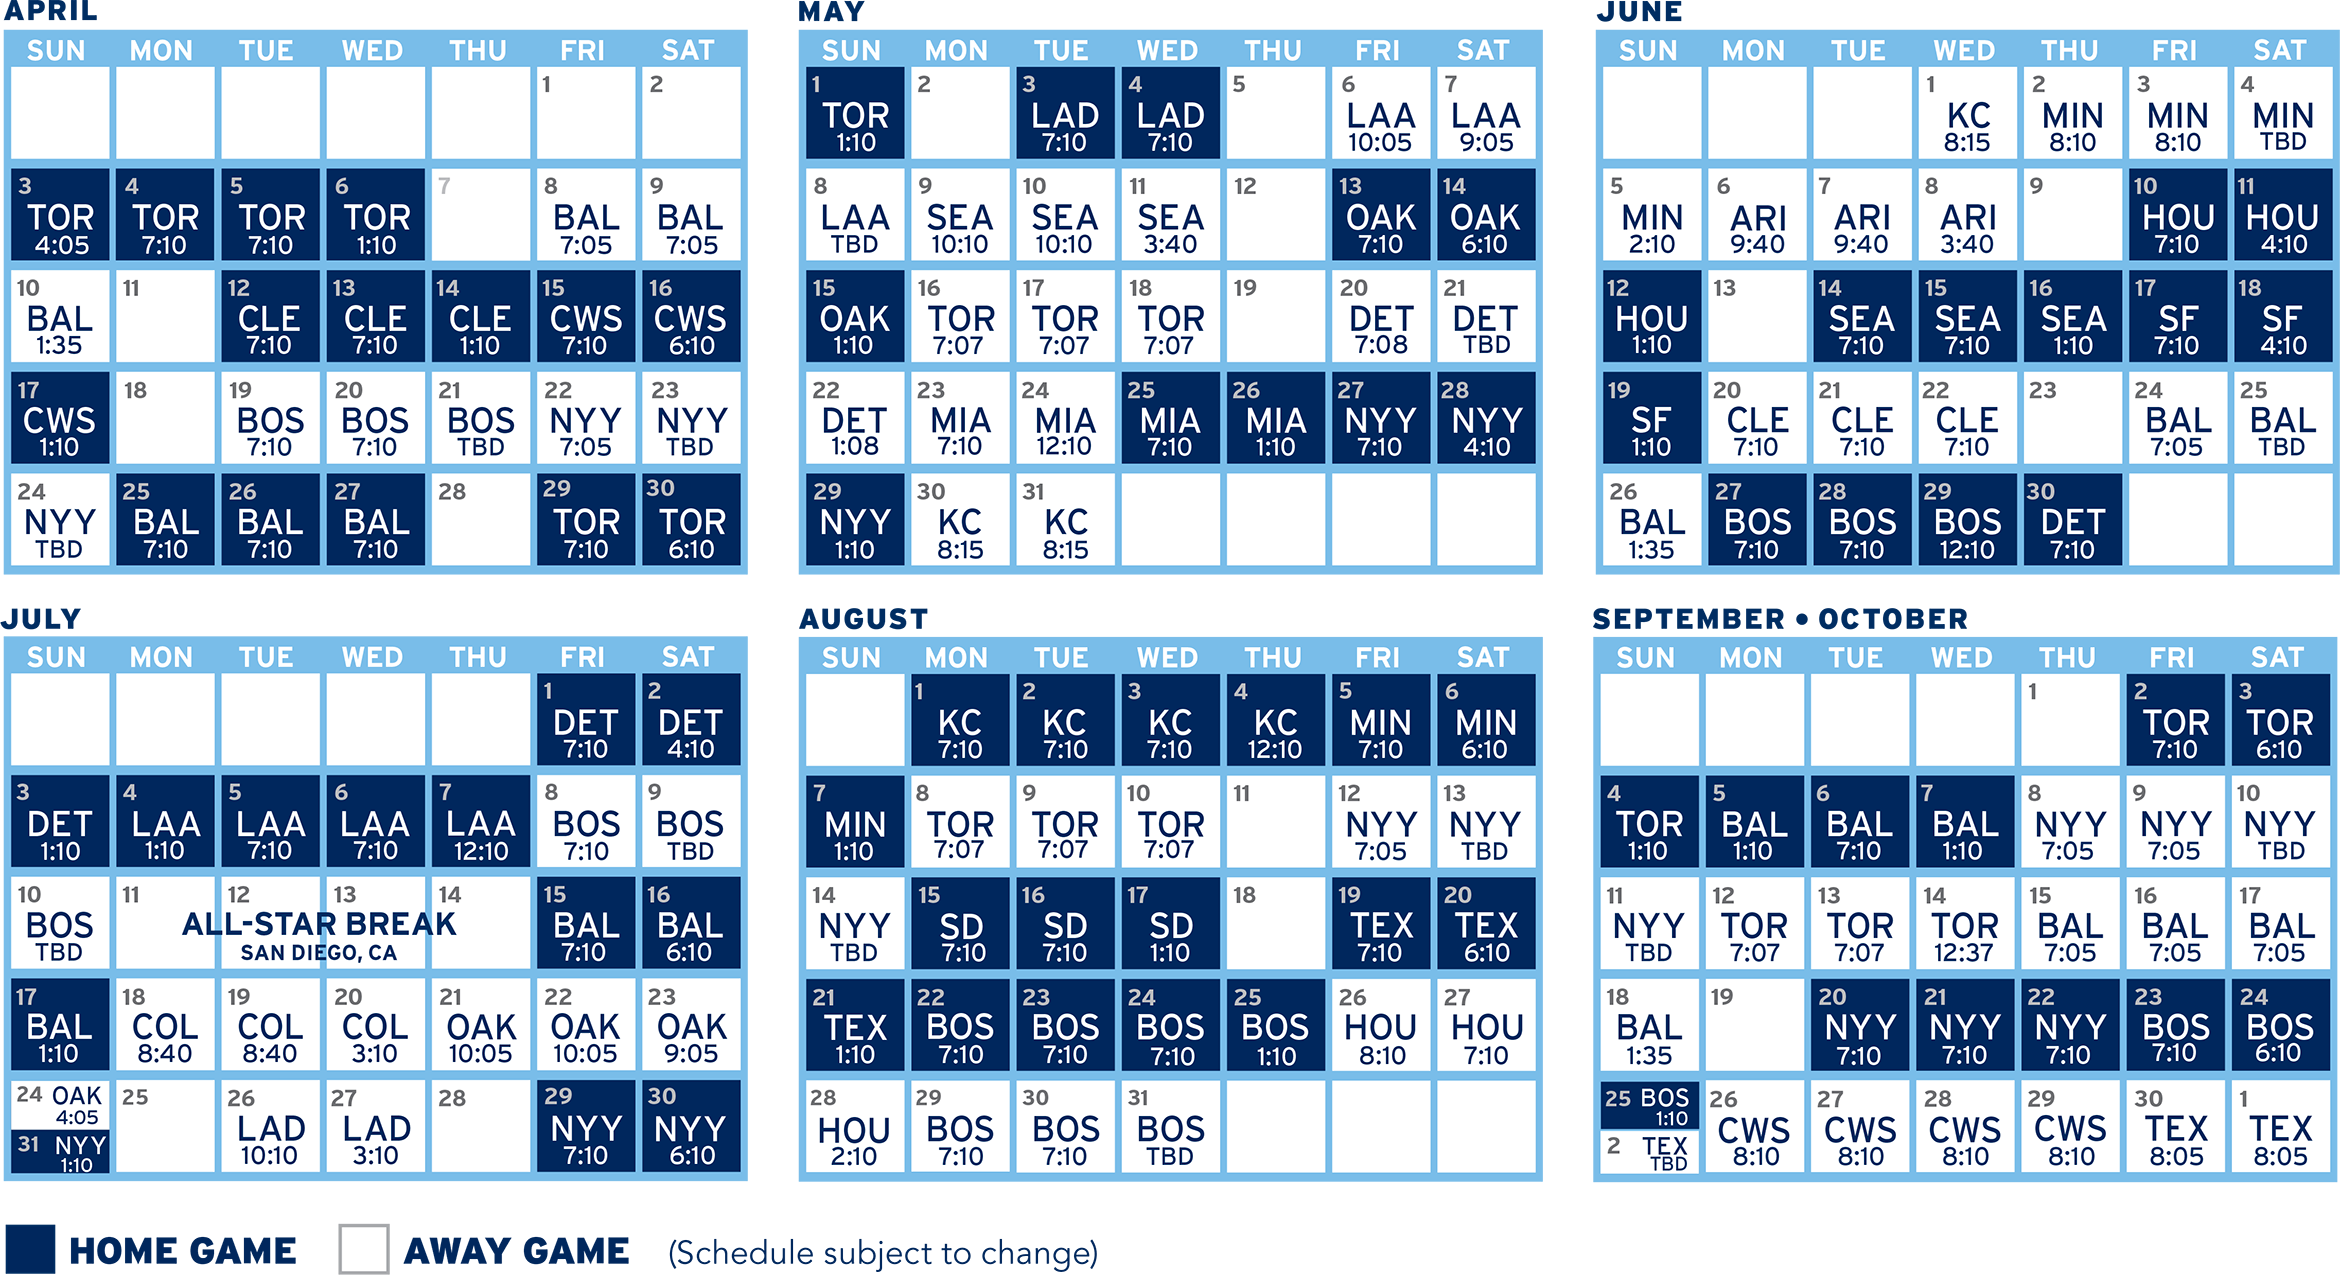 Tampa Bay Rays Schedule Printable Web Matsui's First And Last Home Runs.